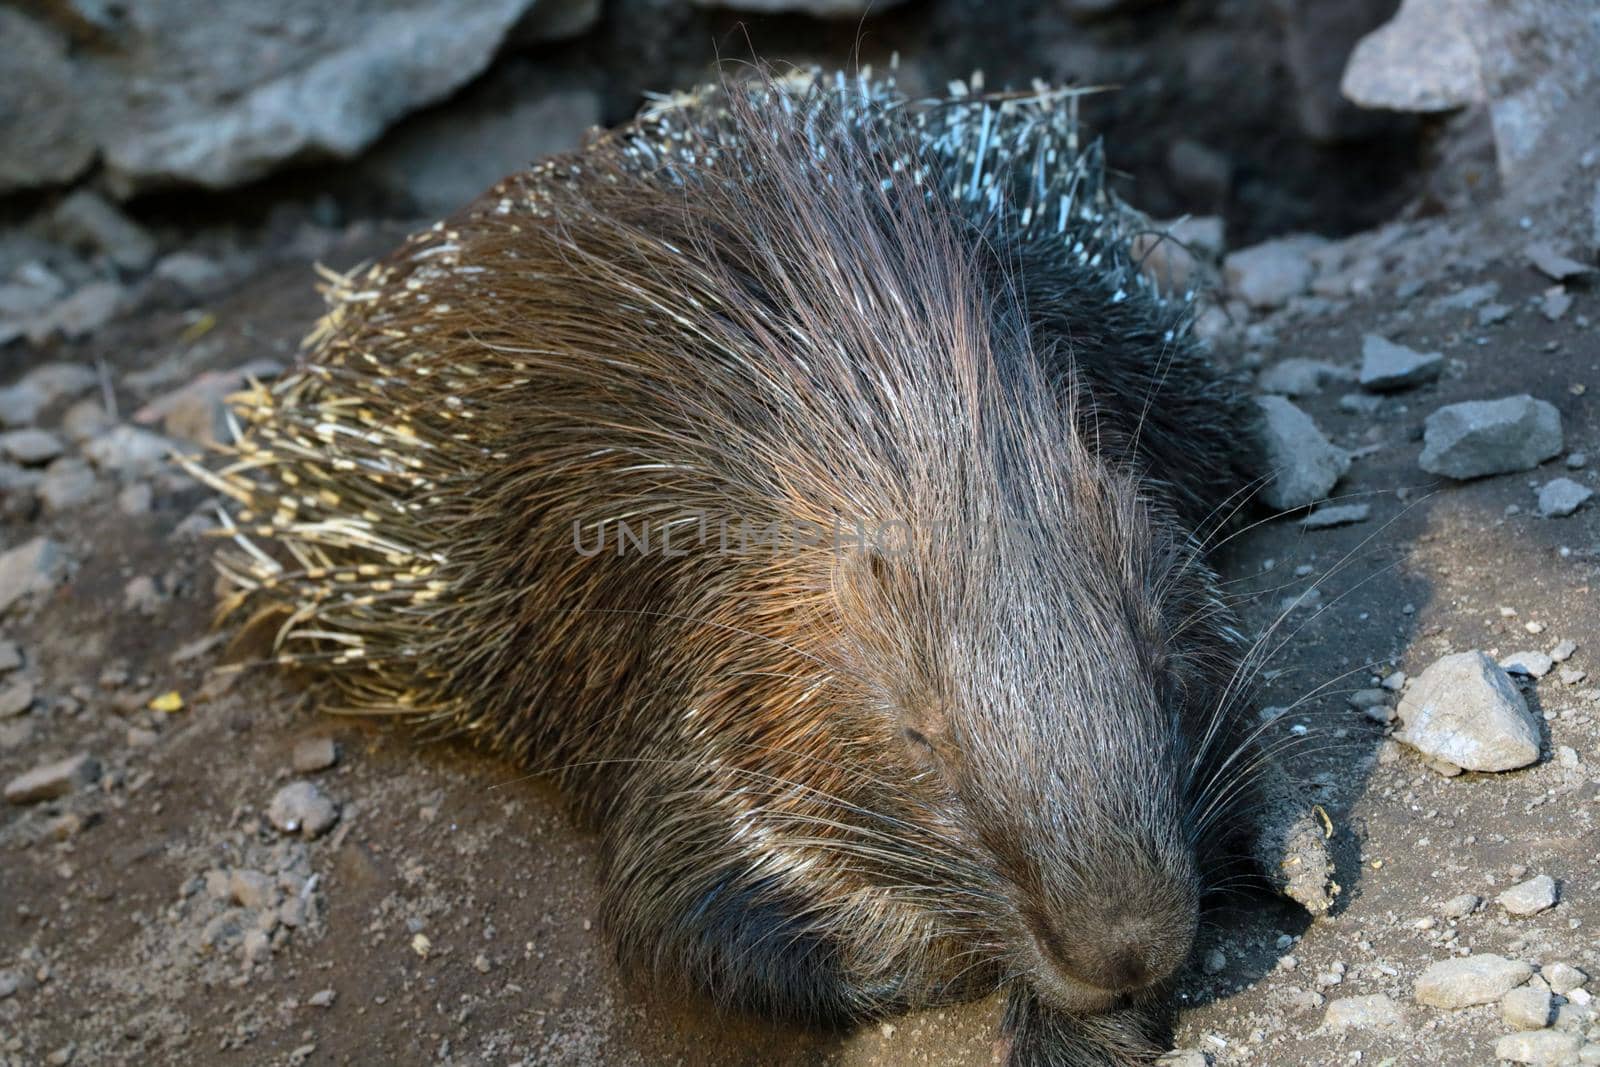 The porcupine lies on the ground and basks in the sun. Porcupines are large rodents with sharp spines or quills that protect them from predators. by kip02kas